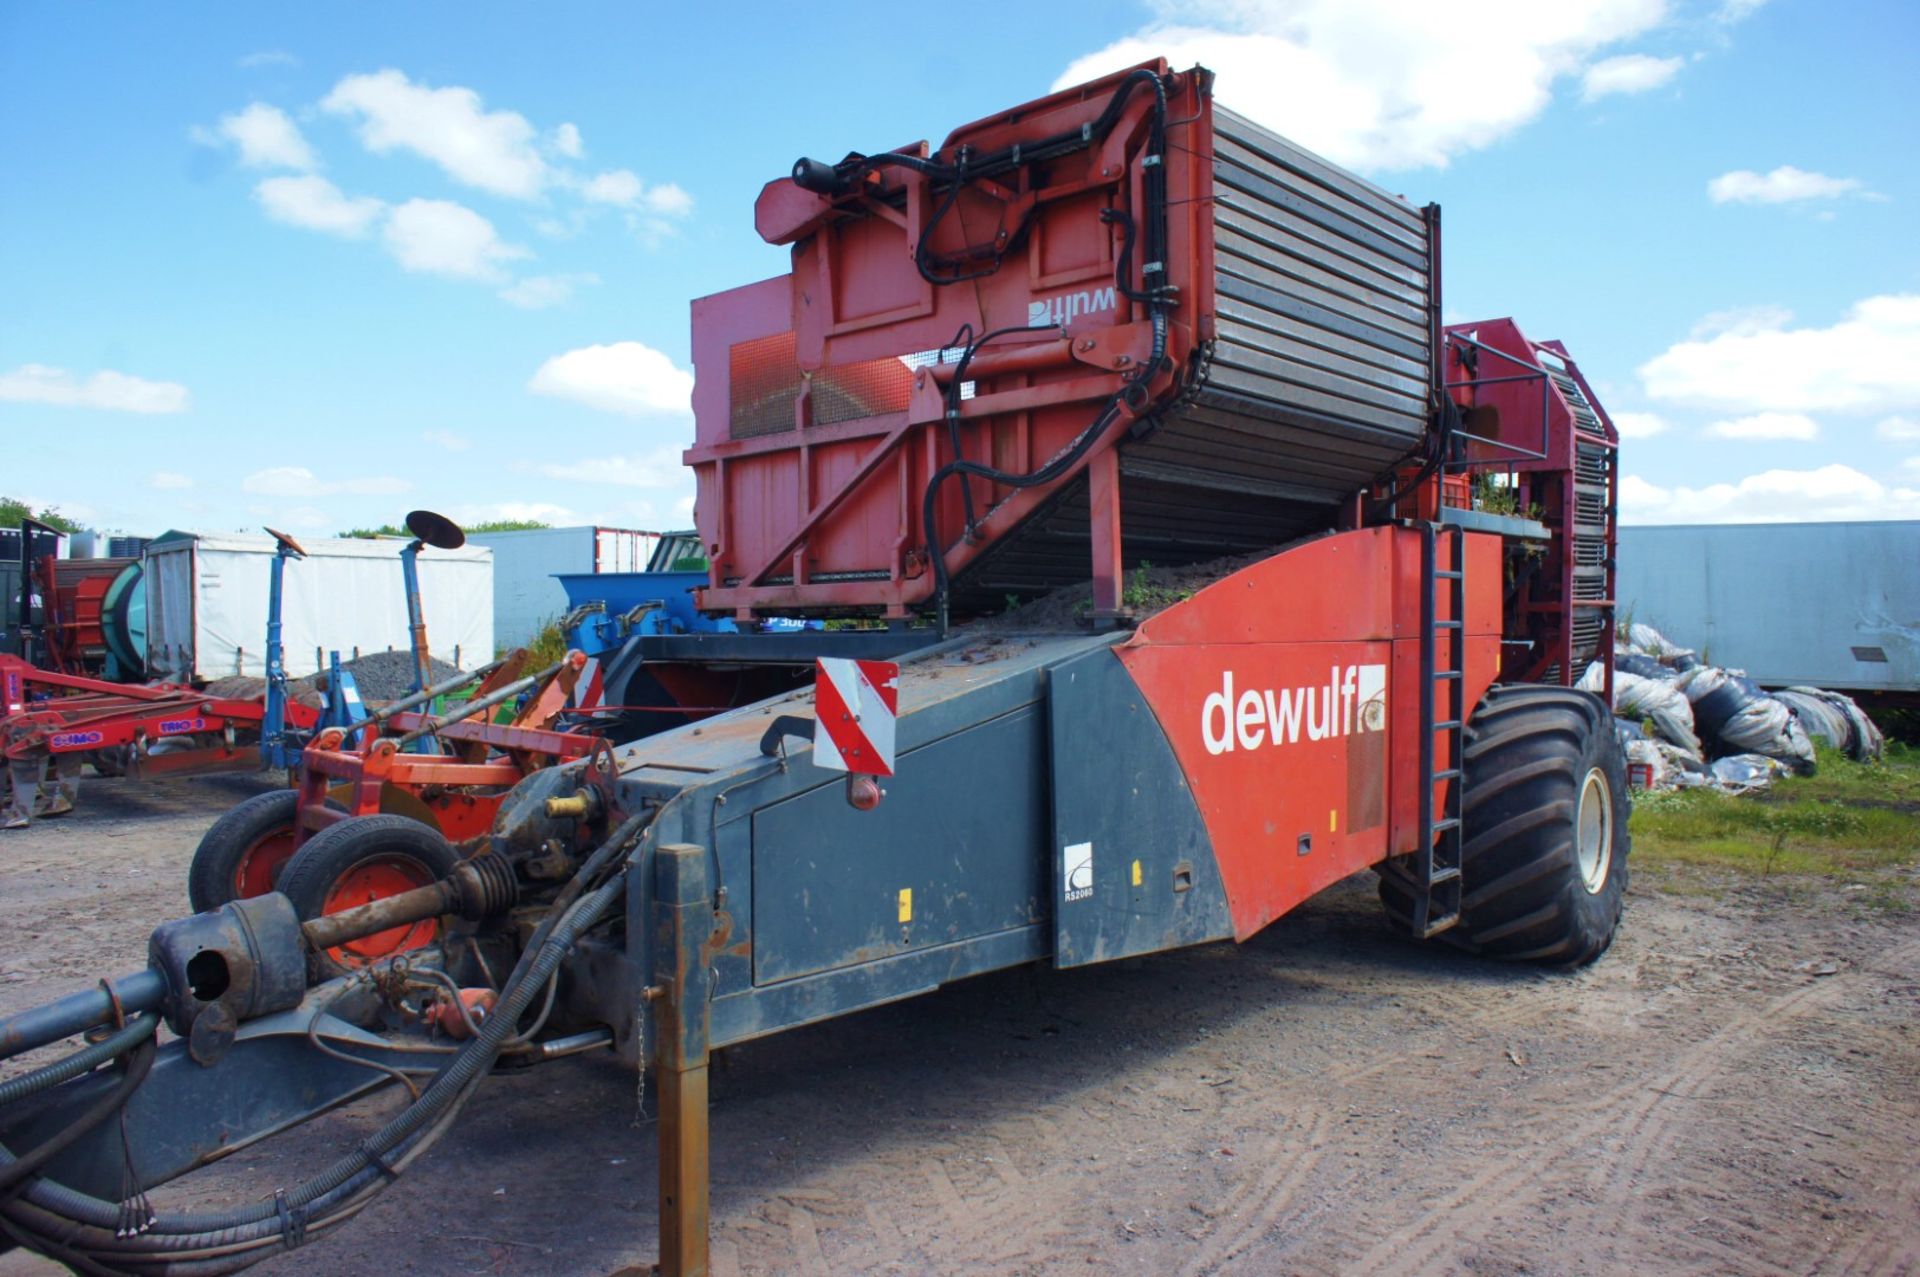 Dewulf RS2060 Trailed 2-Row Sieving Harvester, Serial Number 5811679, Year 2011 - Image 2 of 10